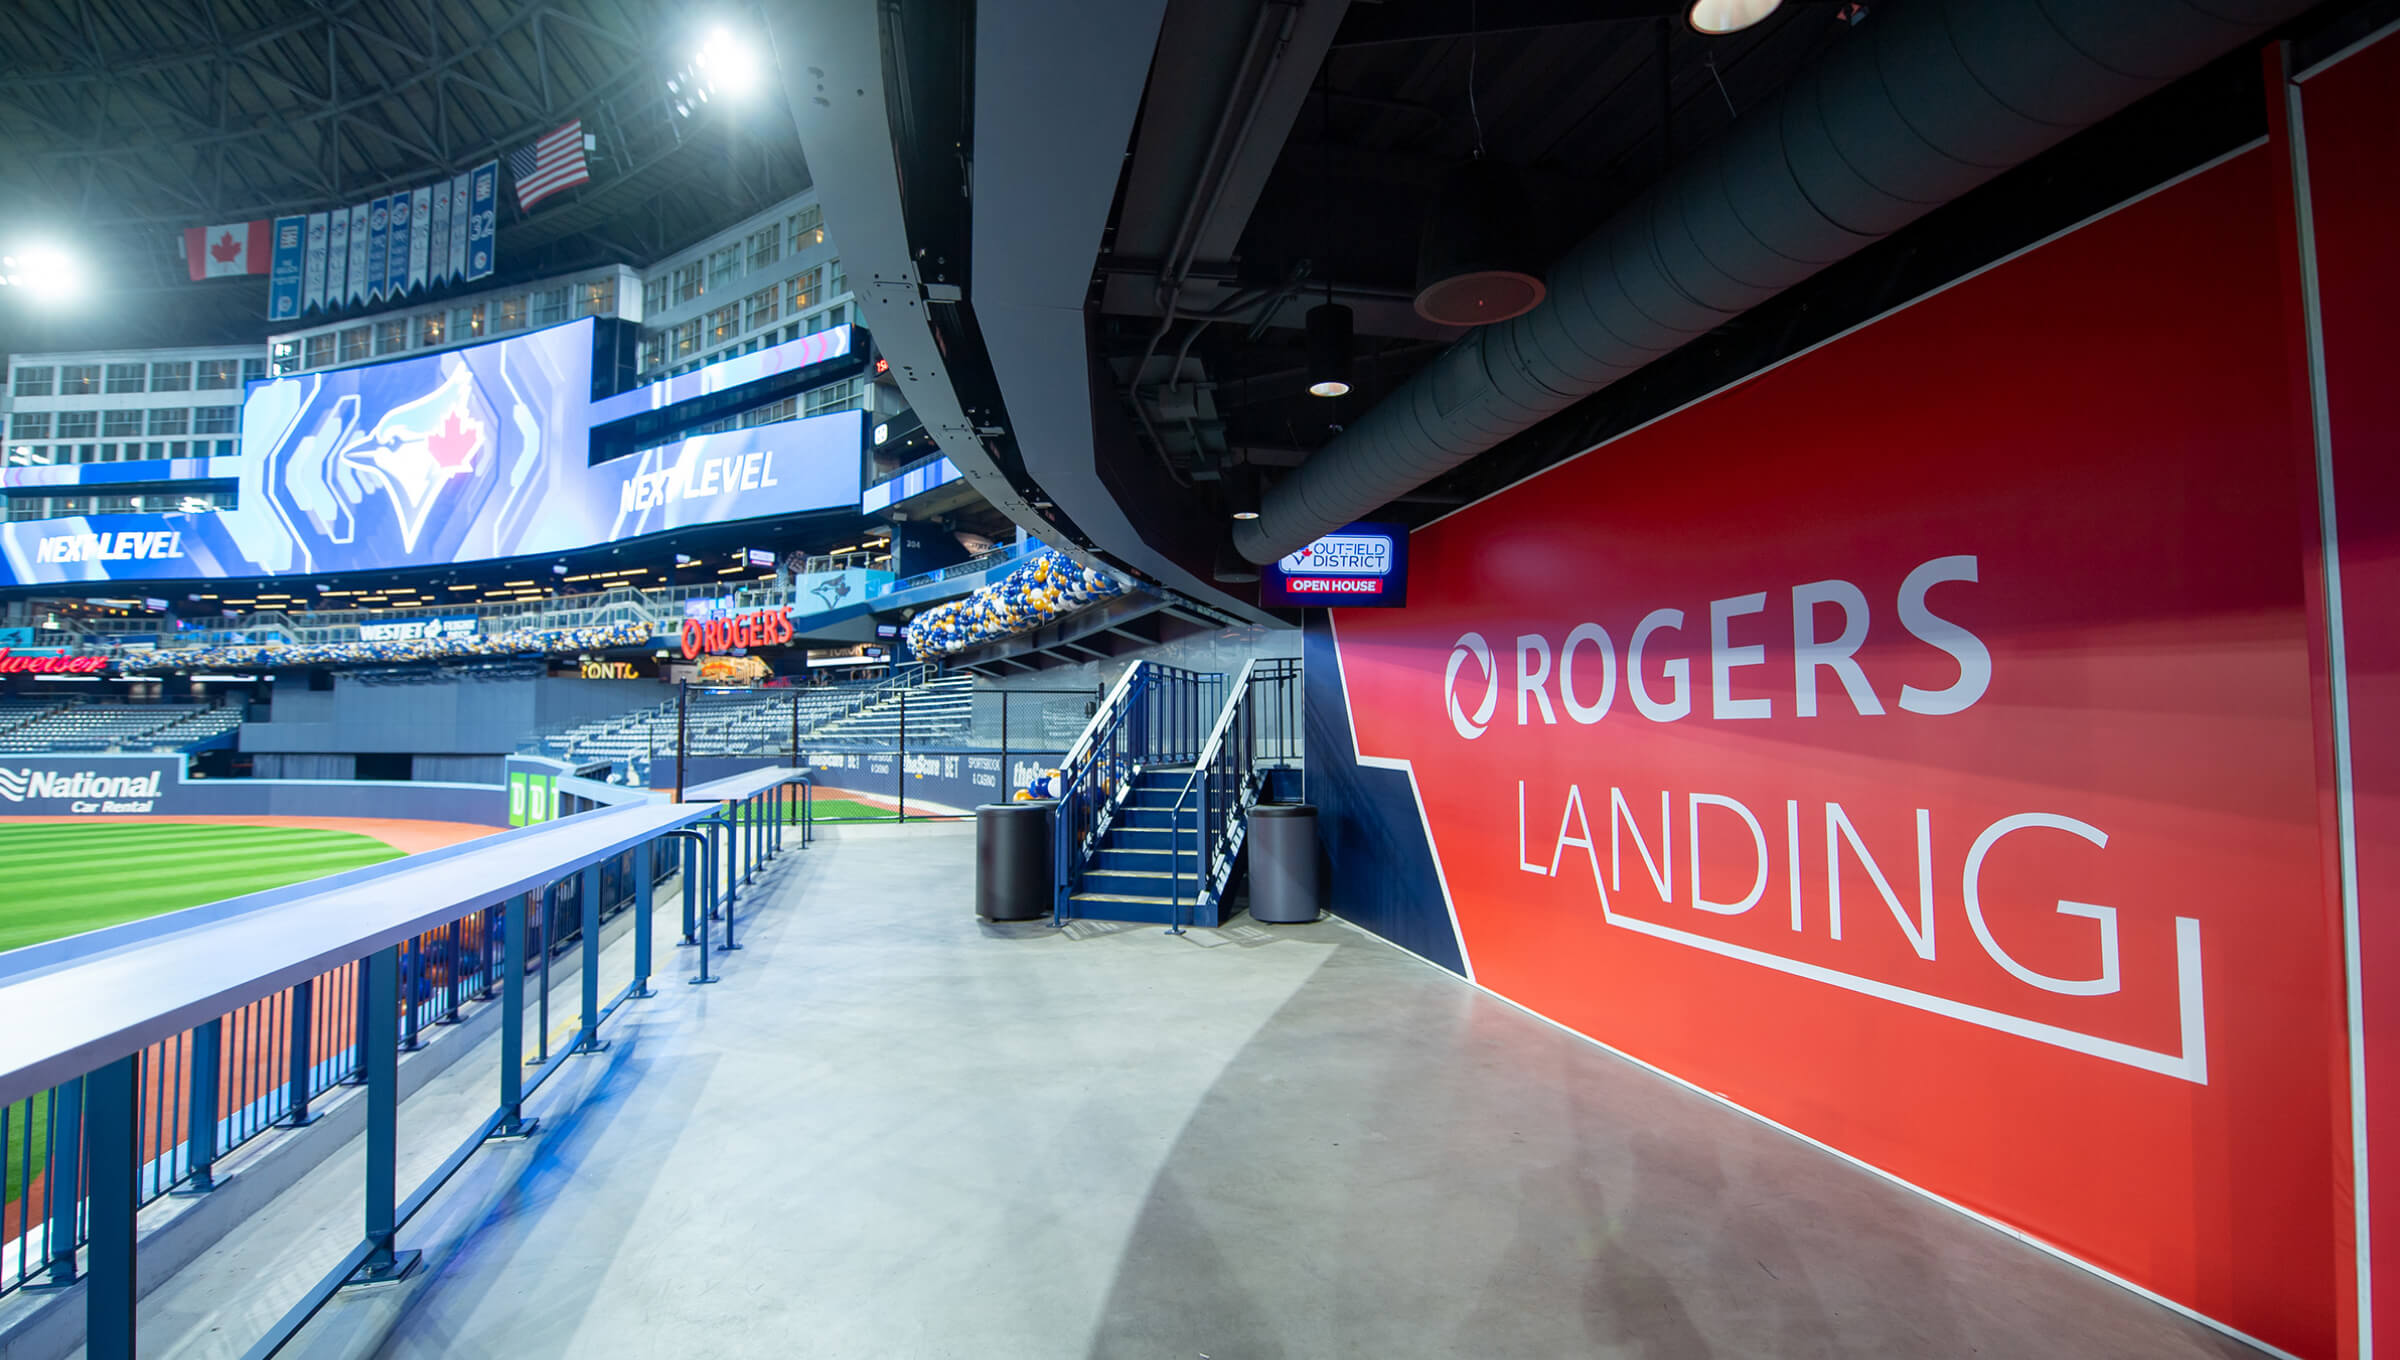 Rogers Centre Seating Chart + Rows, Seats and Club Seats